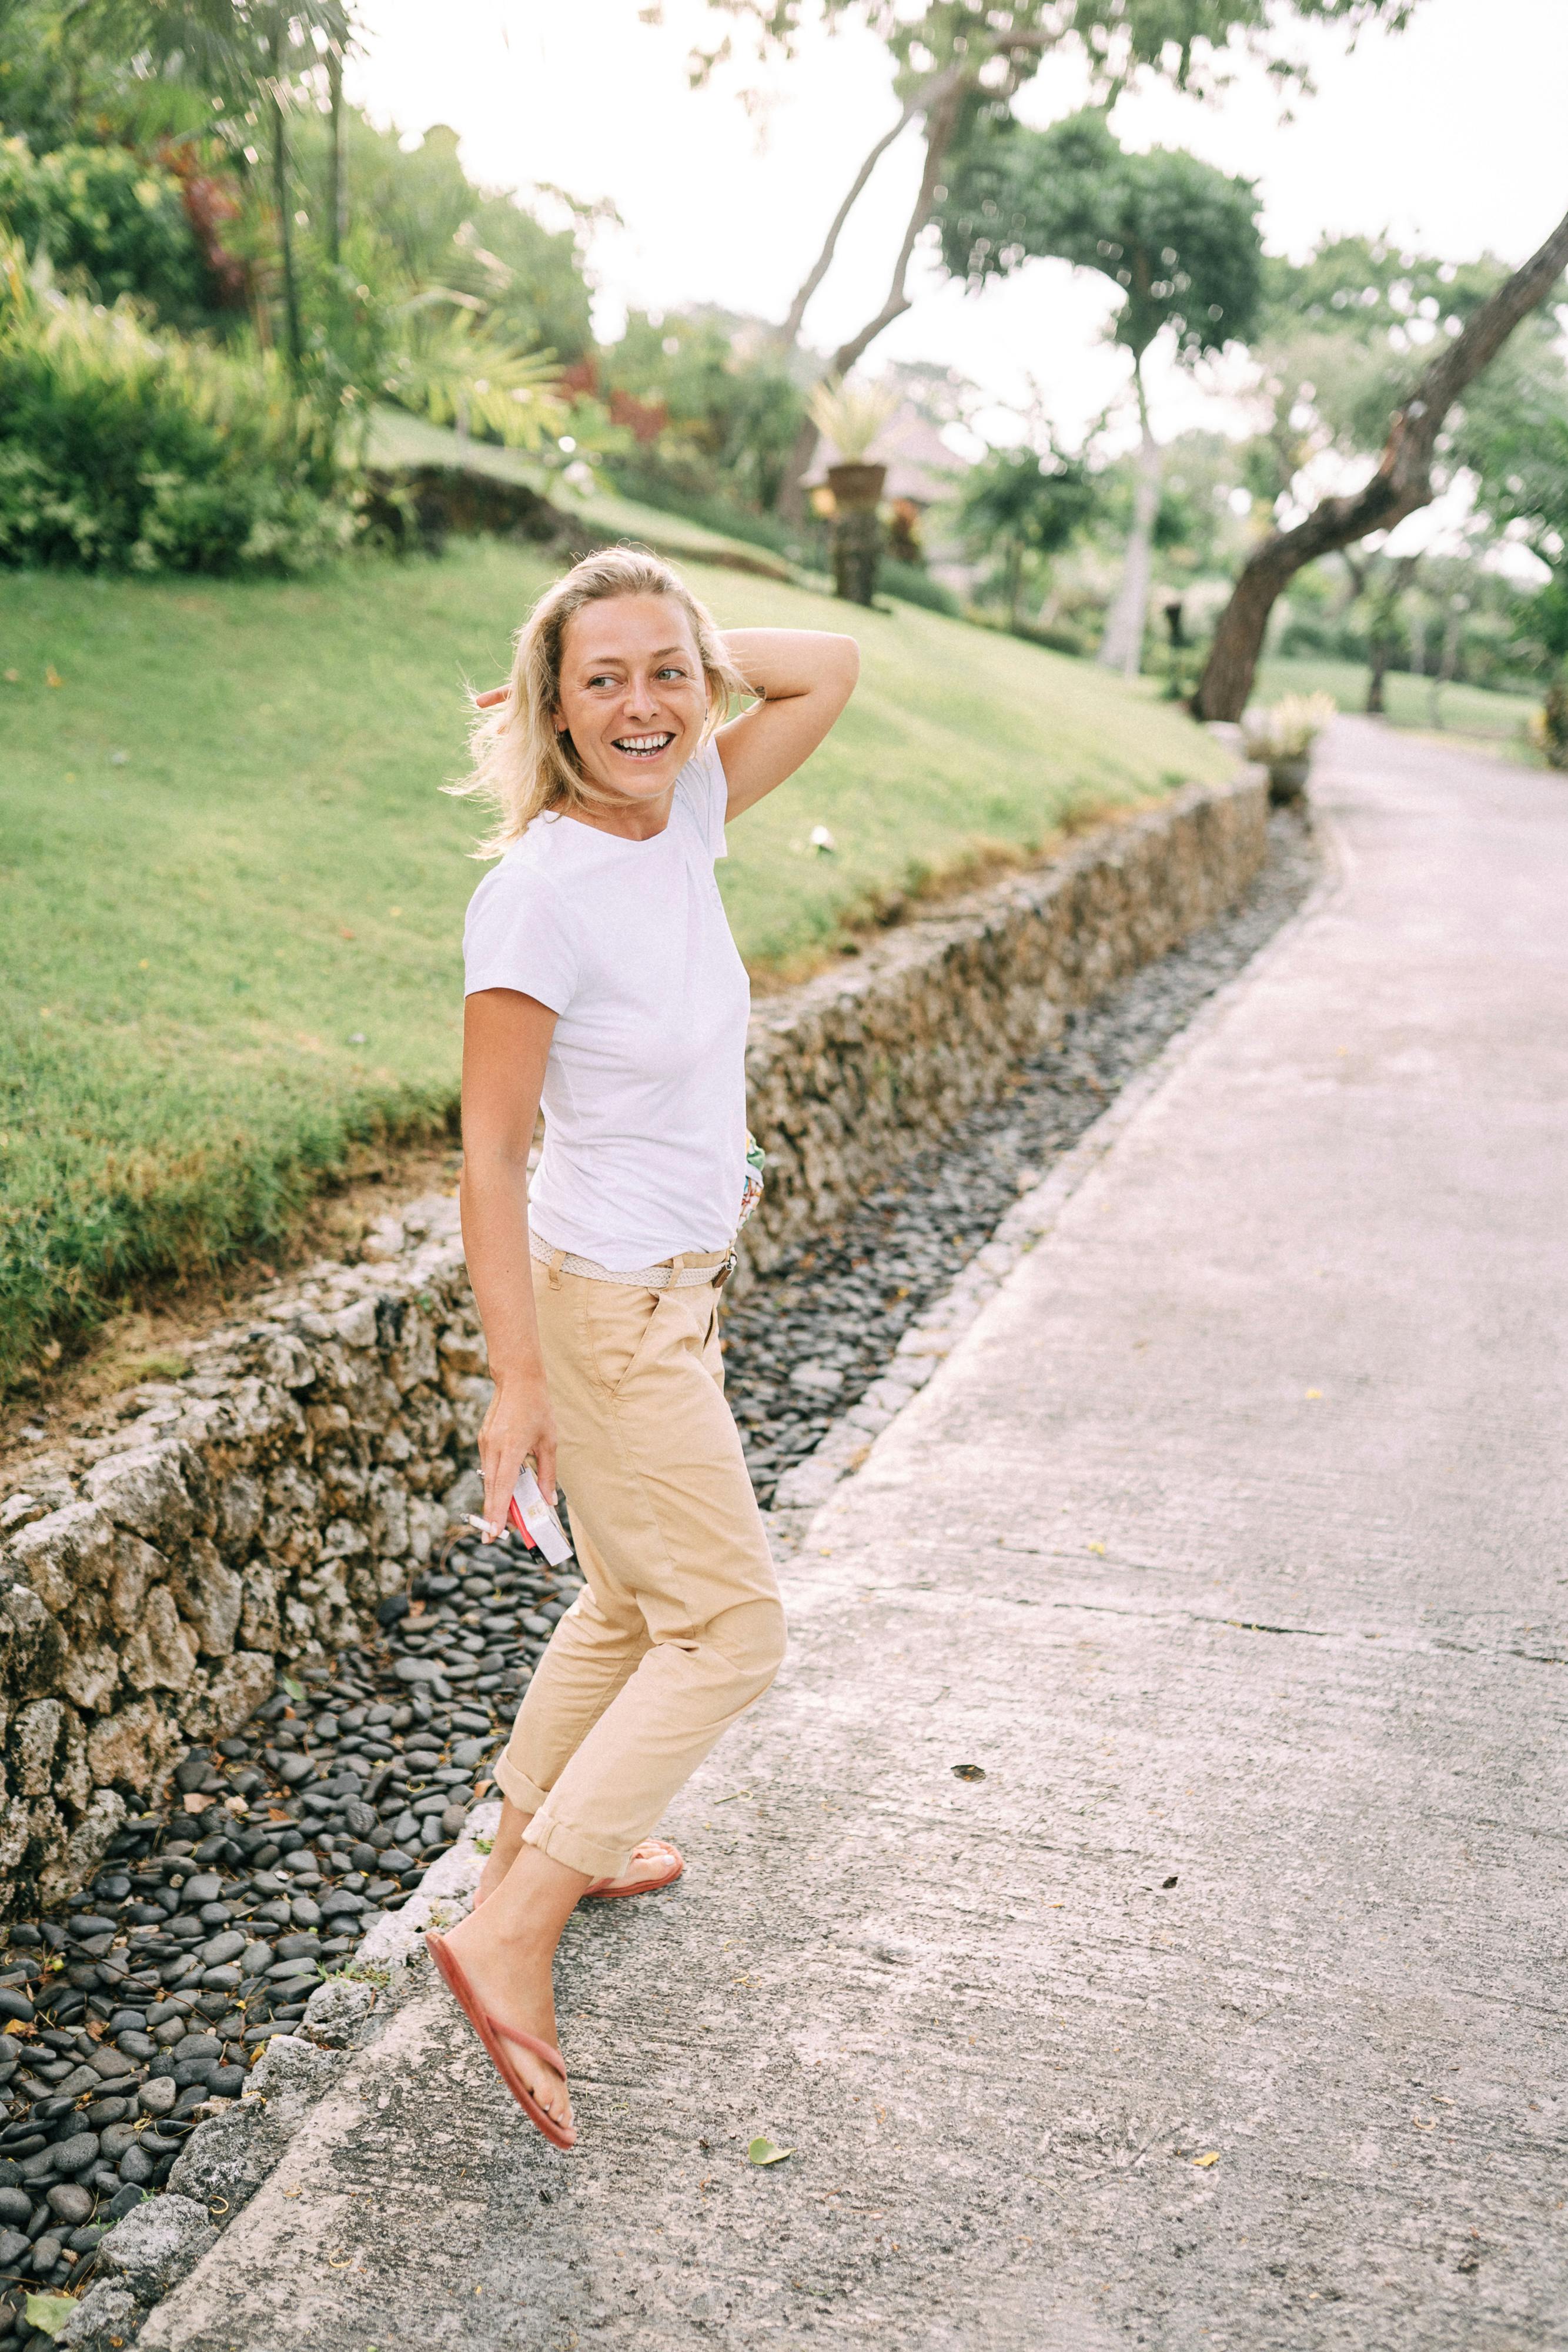 Woman in White Tshirt and Khaki Pants Standing on Gray Concrete Pathway   Free Stock Photo